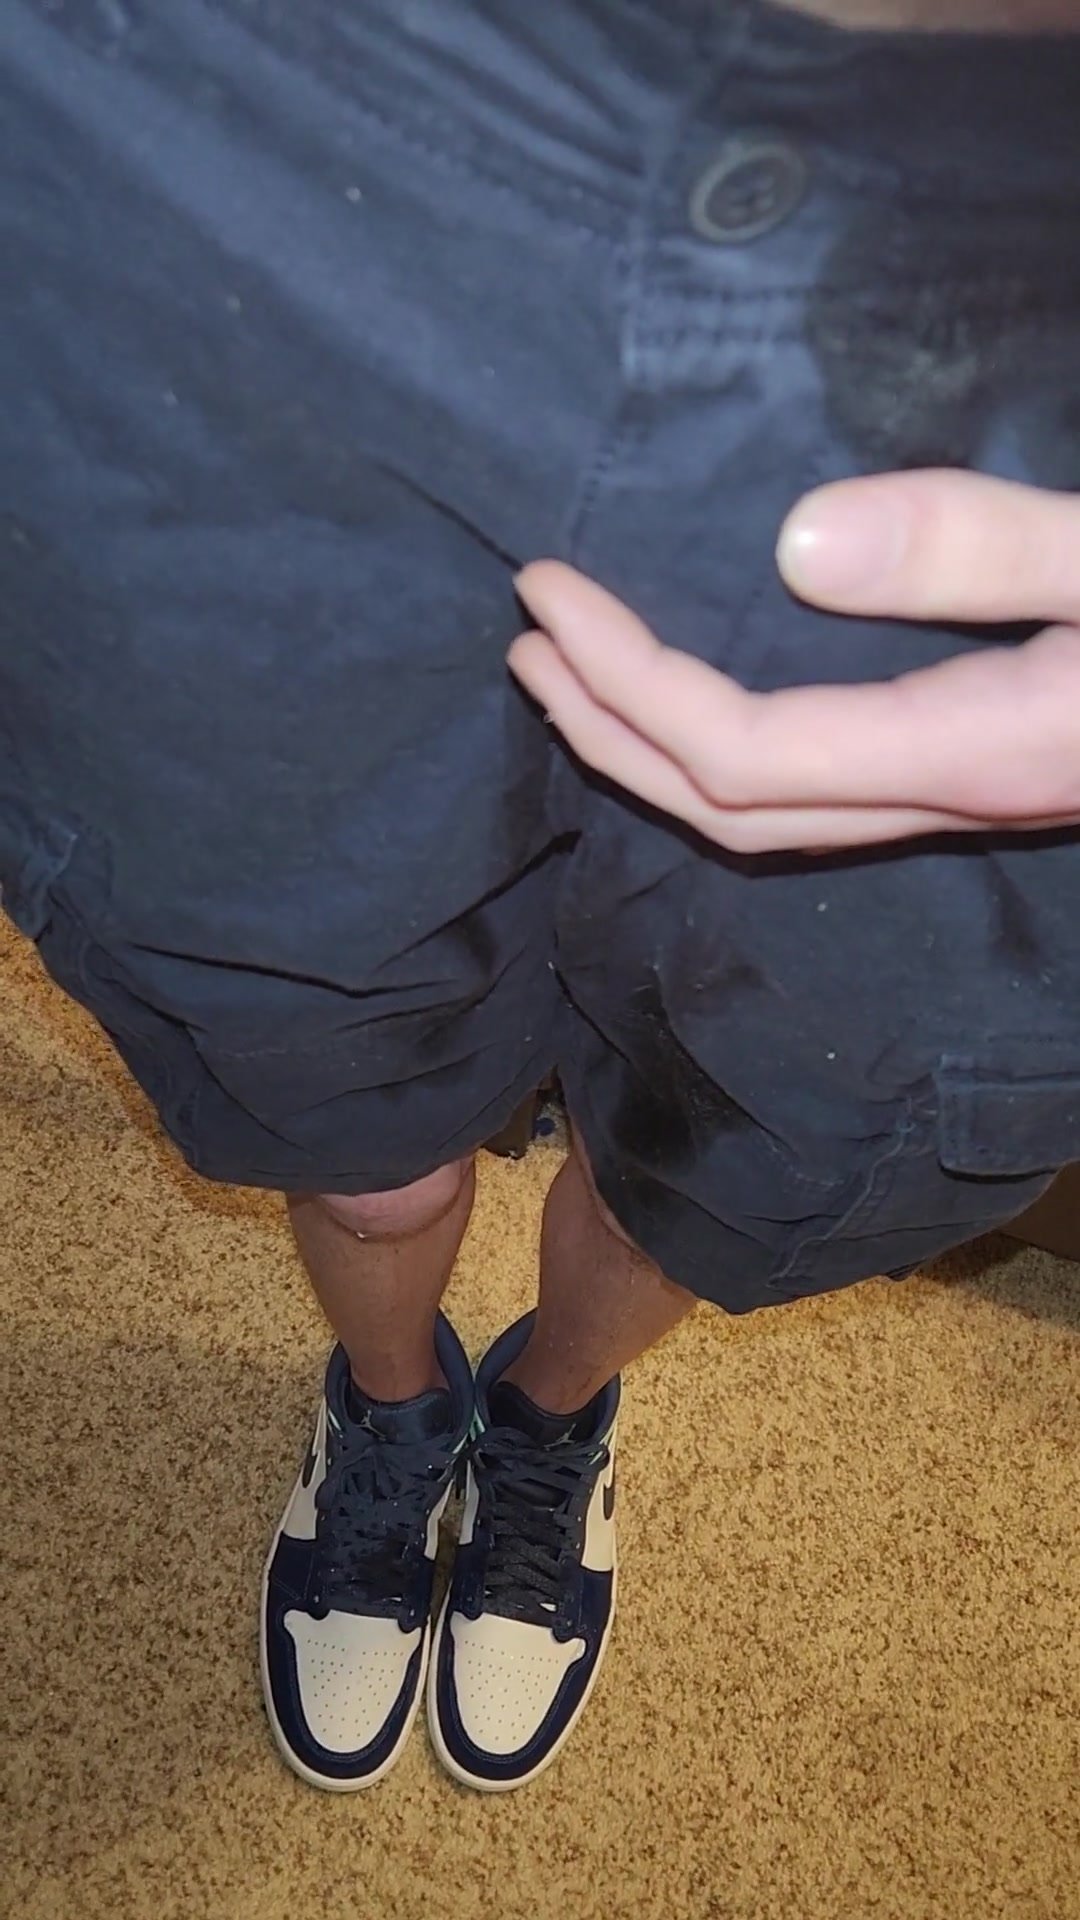 Flooding my shorts and shoes